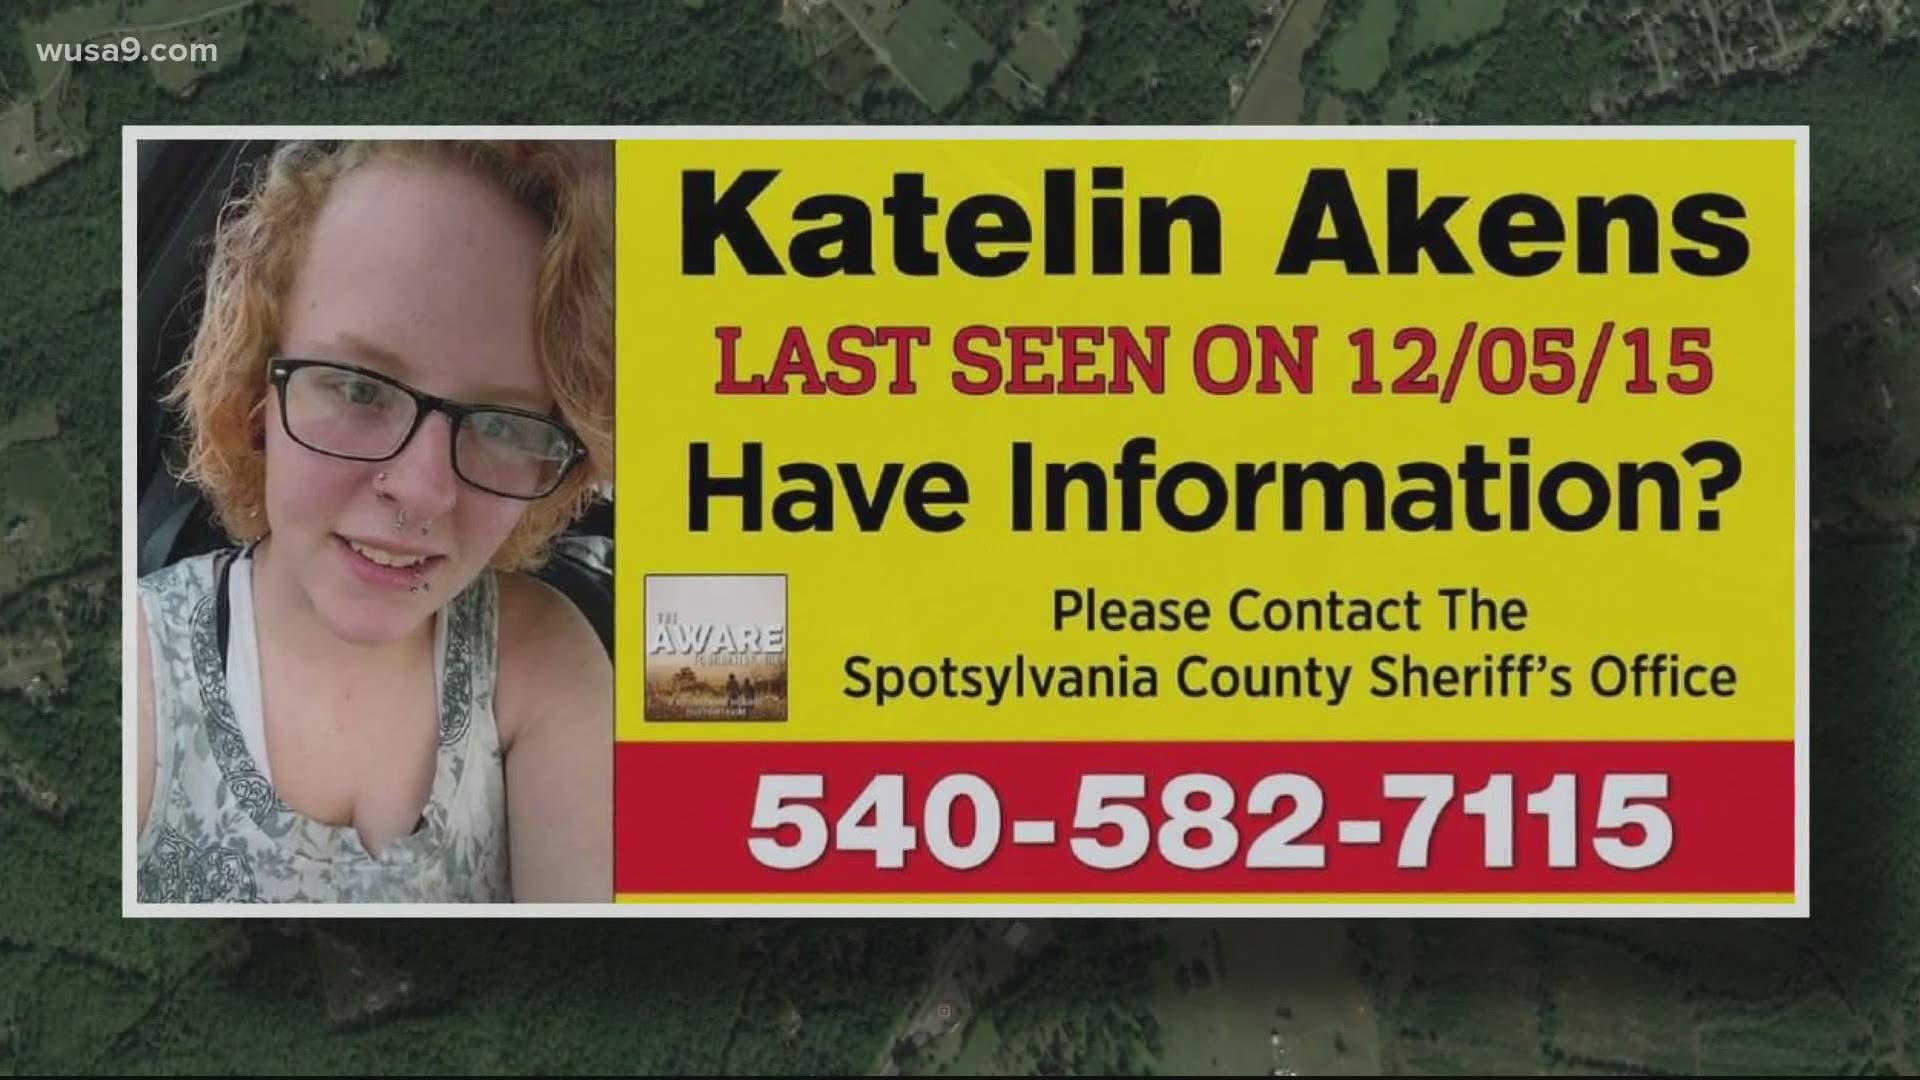 Detectives searching for Katelin Akens, 19, say her stepdad stopped cooperating years ago. Could a billboard convince him to help find her?